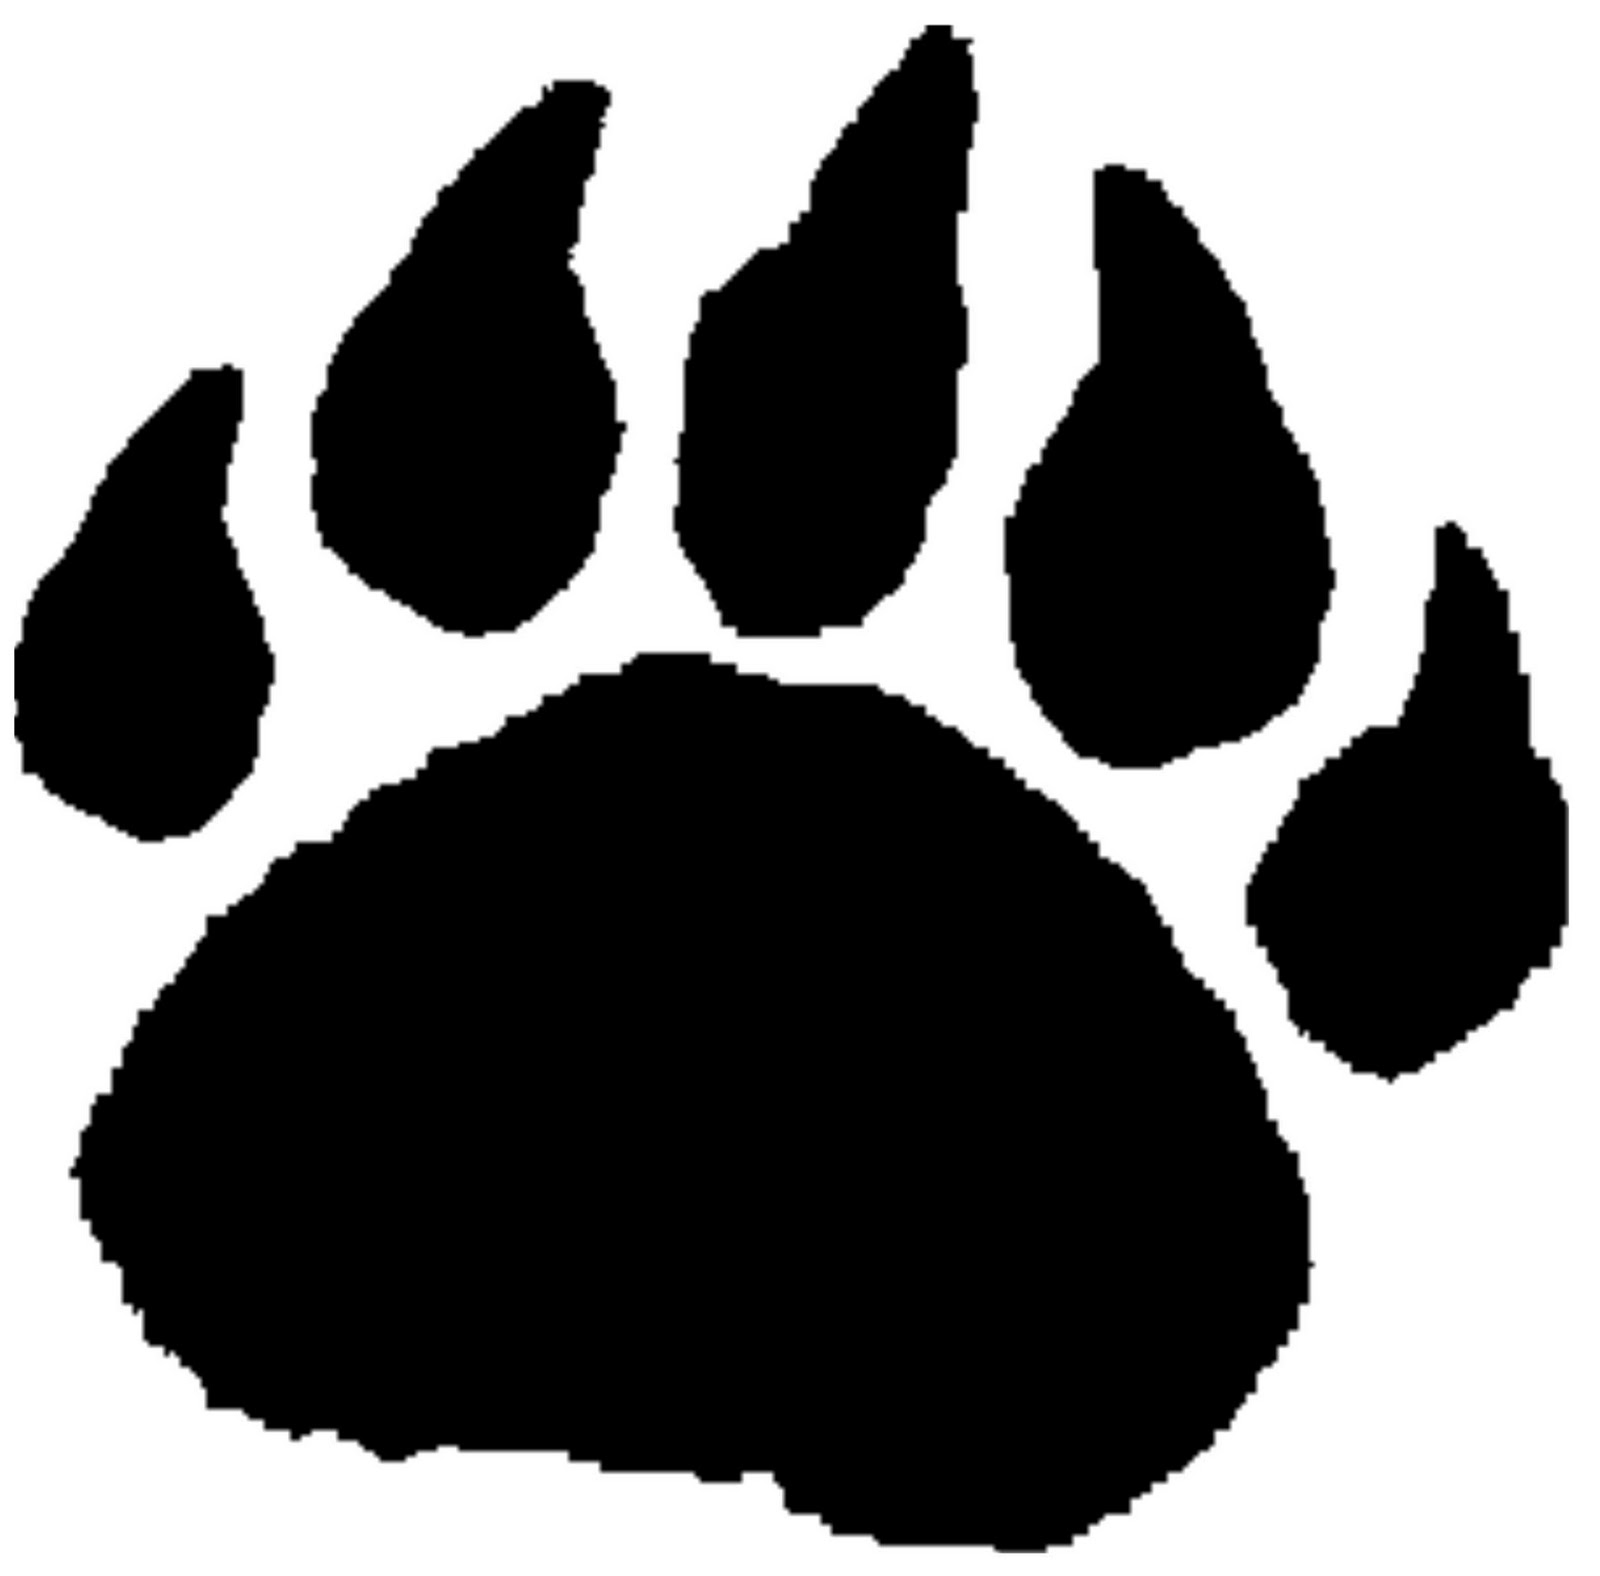 Grizzly Paw Image - ClipArt Best